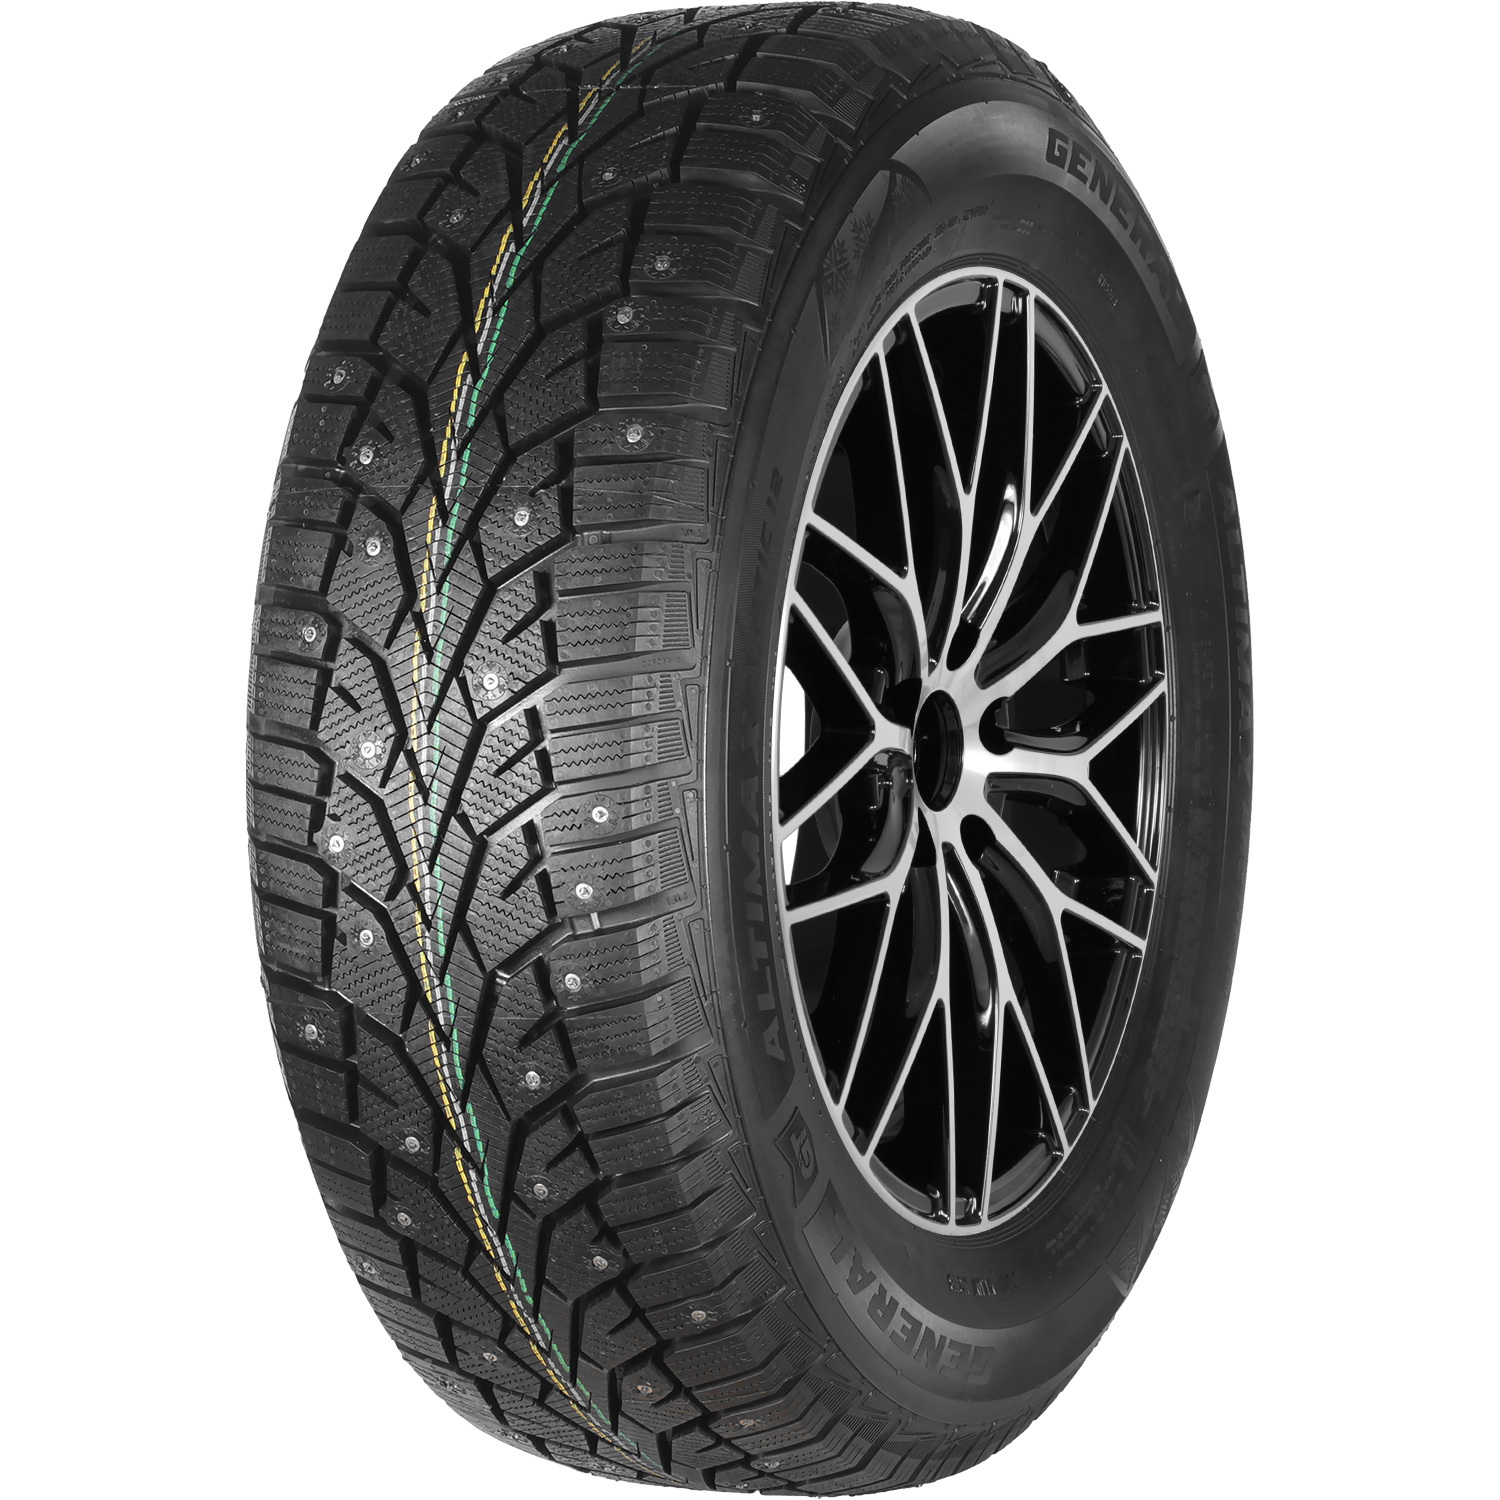 Автомобильная шина General Tire Altimax Arctic 12 175/65 R14 86T Шипованные tire cover central ocean sunrise sun moon spare tire cover select tire size back up camera in menu custom sized to any